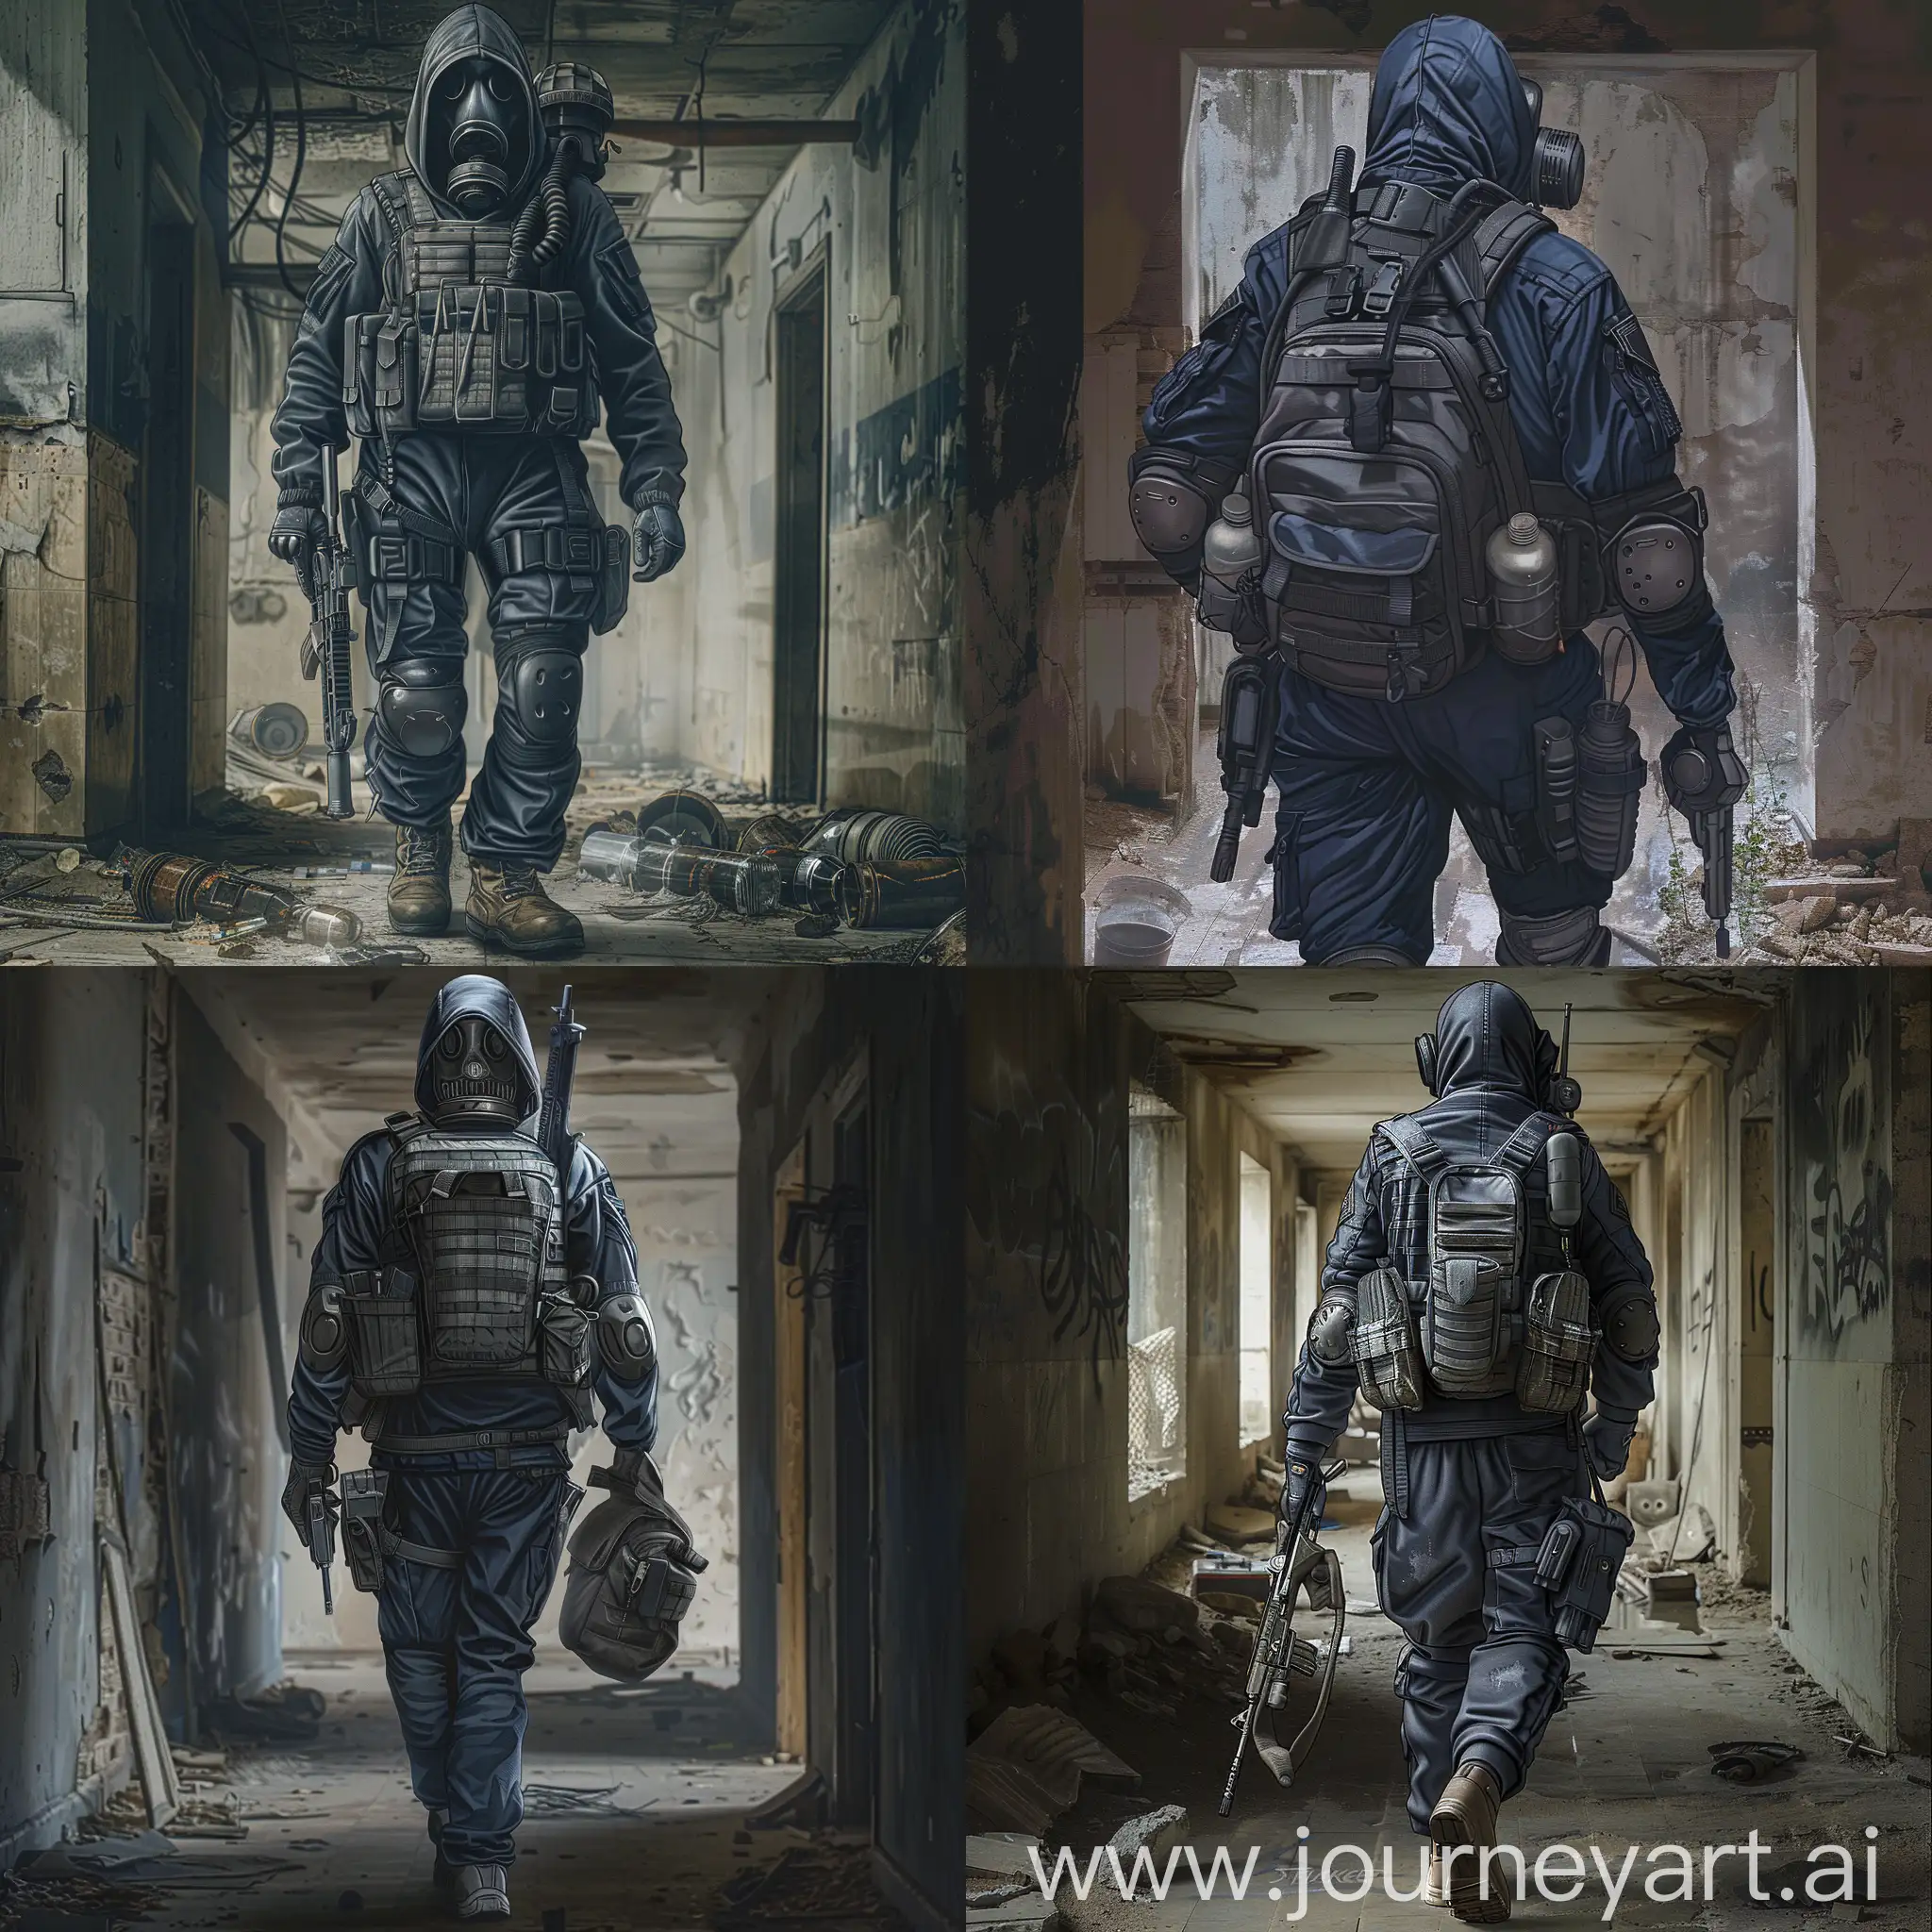 Digital art is a lone mercenary from the universe of S.T.A.L.K.E.R., dressed in a dark blue military jumpsuit, gray military armor on his body, a gasmask on his face, a military backpack on his back, a weapon in his hands, he walk alone in abandoned soviet bunker, horror style.